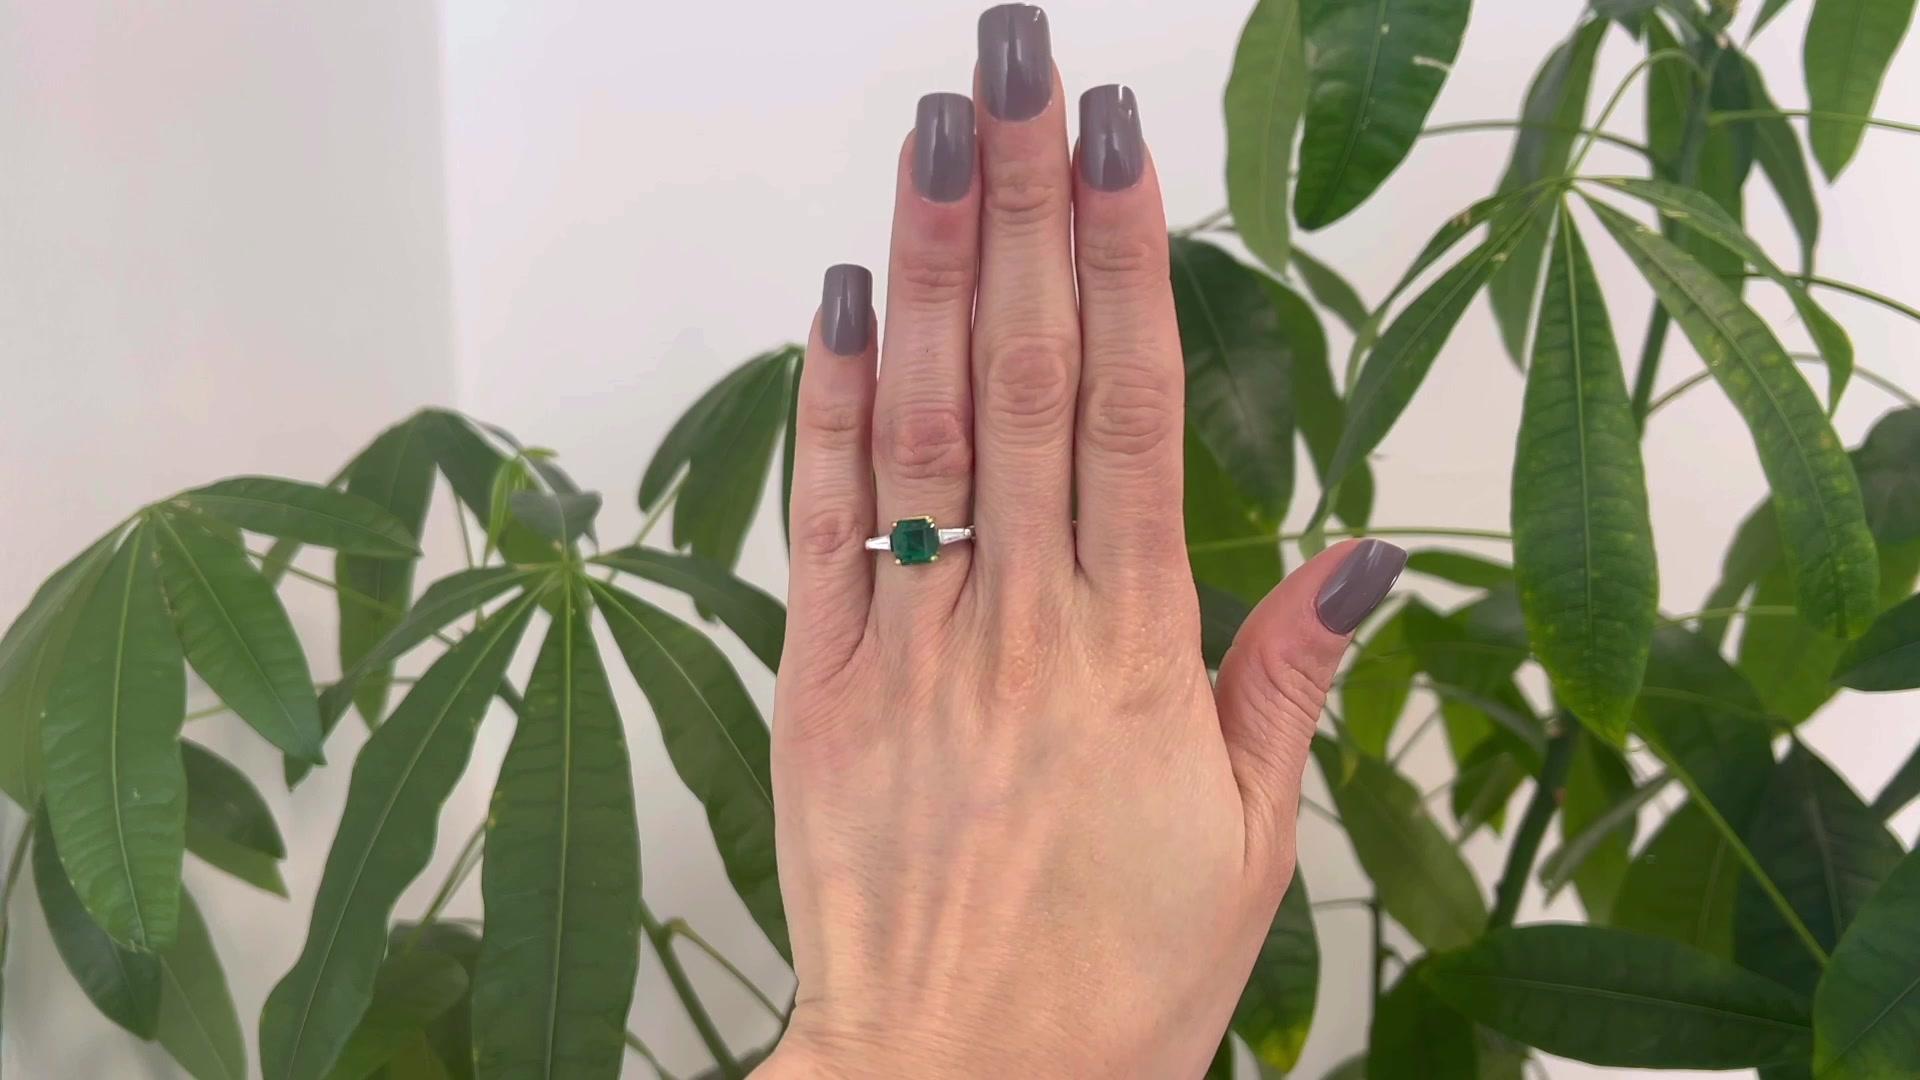 One Vintage GIA Zambian Emerald Diamond Platinum 18 Karat Yellow Gold Ring. Featuring one GIA octagonal step cut emerald weighing approximately 2.15 carats, accompanied with GIA #6223499265 stating the emerald is of Zambian origin. Accented by two